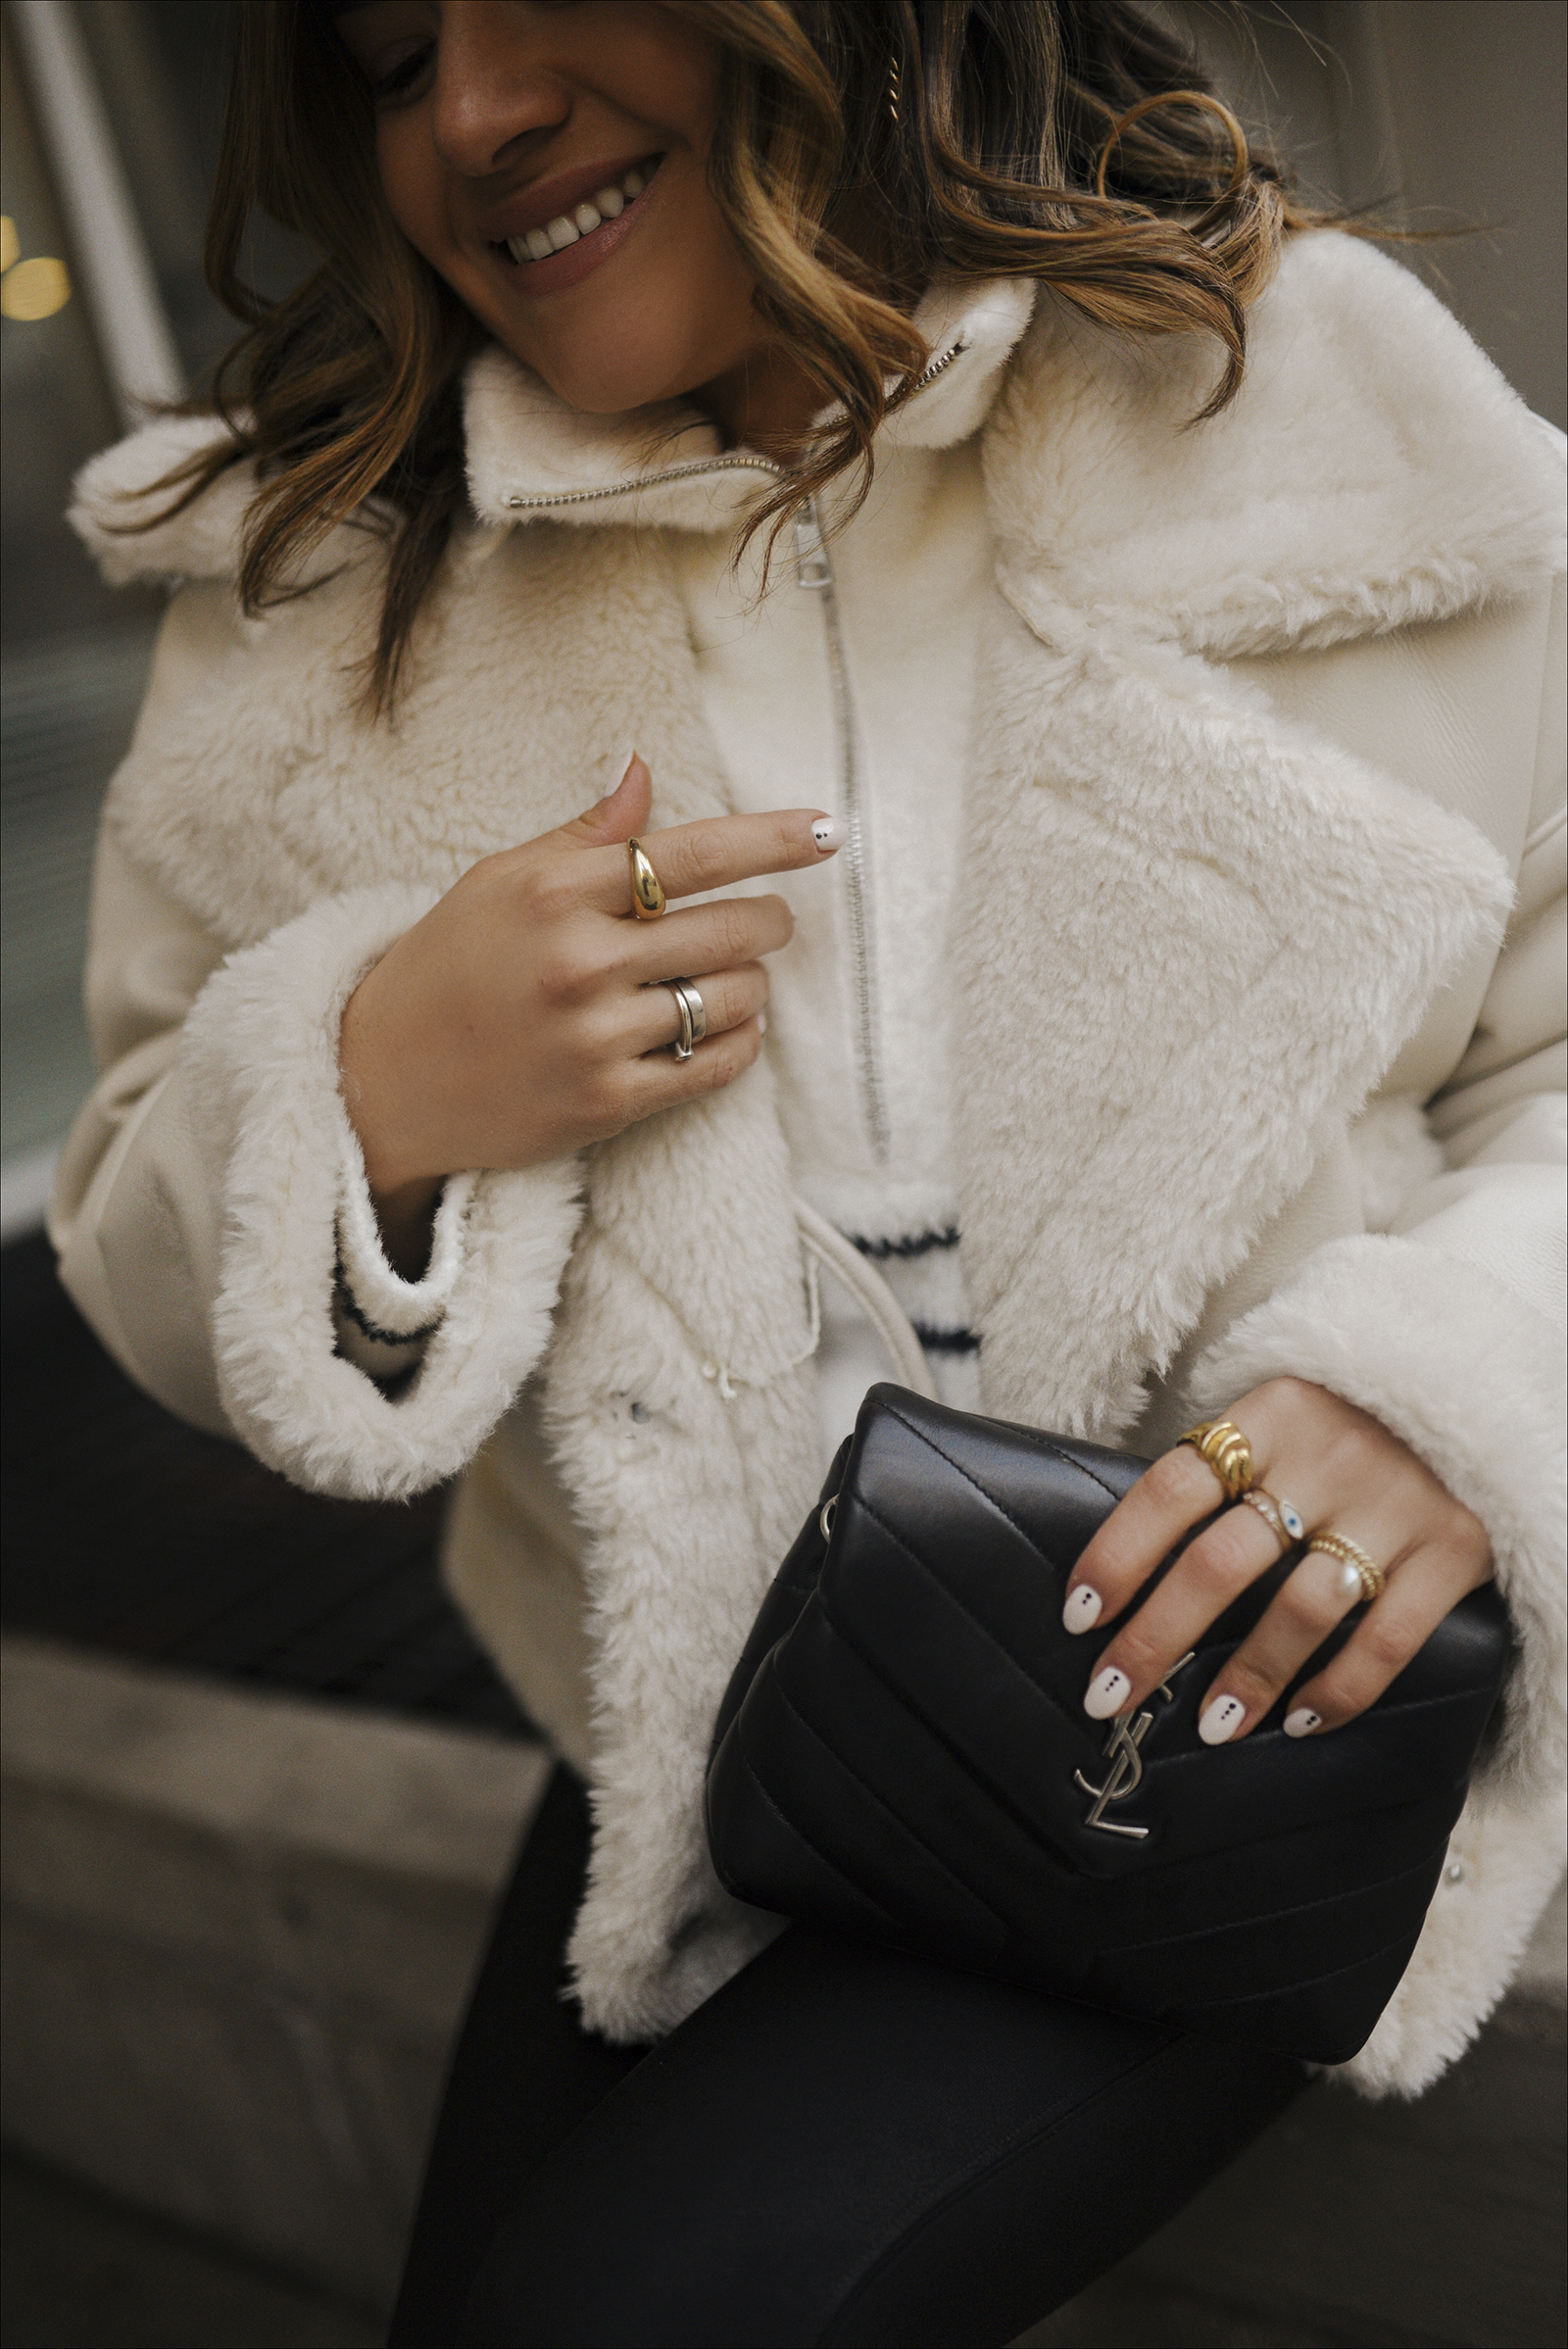 Carolina Hellal of Chic Talk wearing an Abercrombie Sherpa Lined Coat, Spanx faux leather leggings, Vince Camuto suede chunky boots and Yves Saint Laurent black crossbody bag